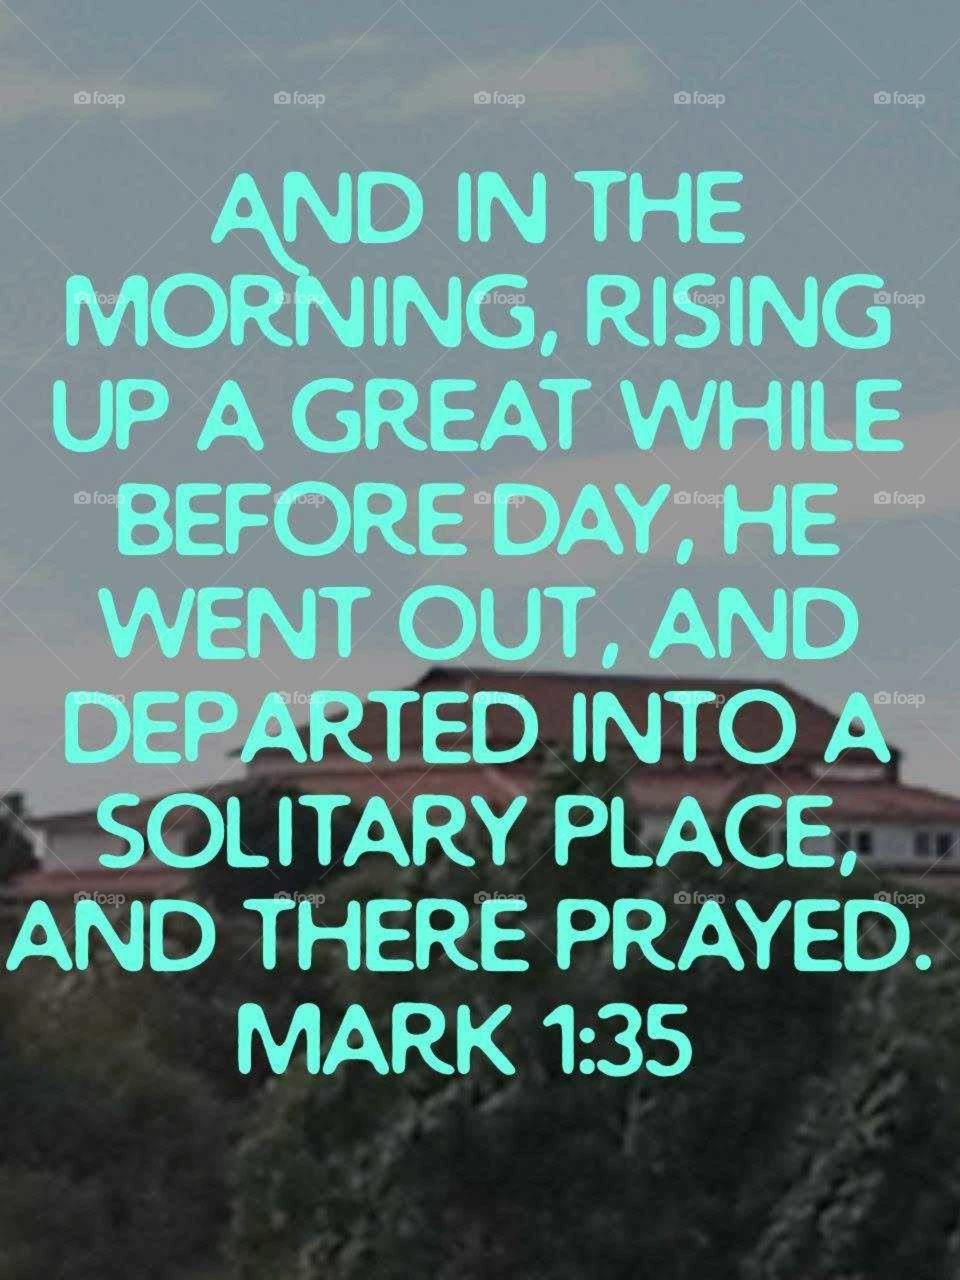 Be an early riser to seek your maker